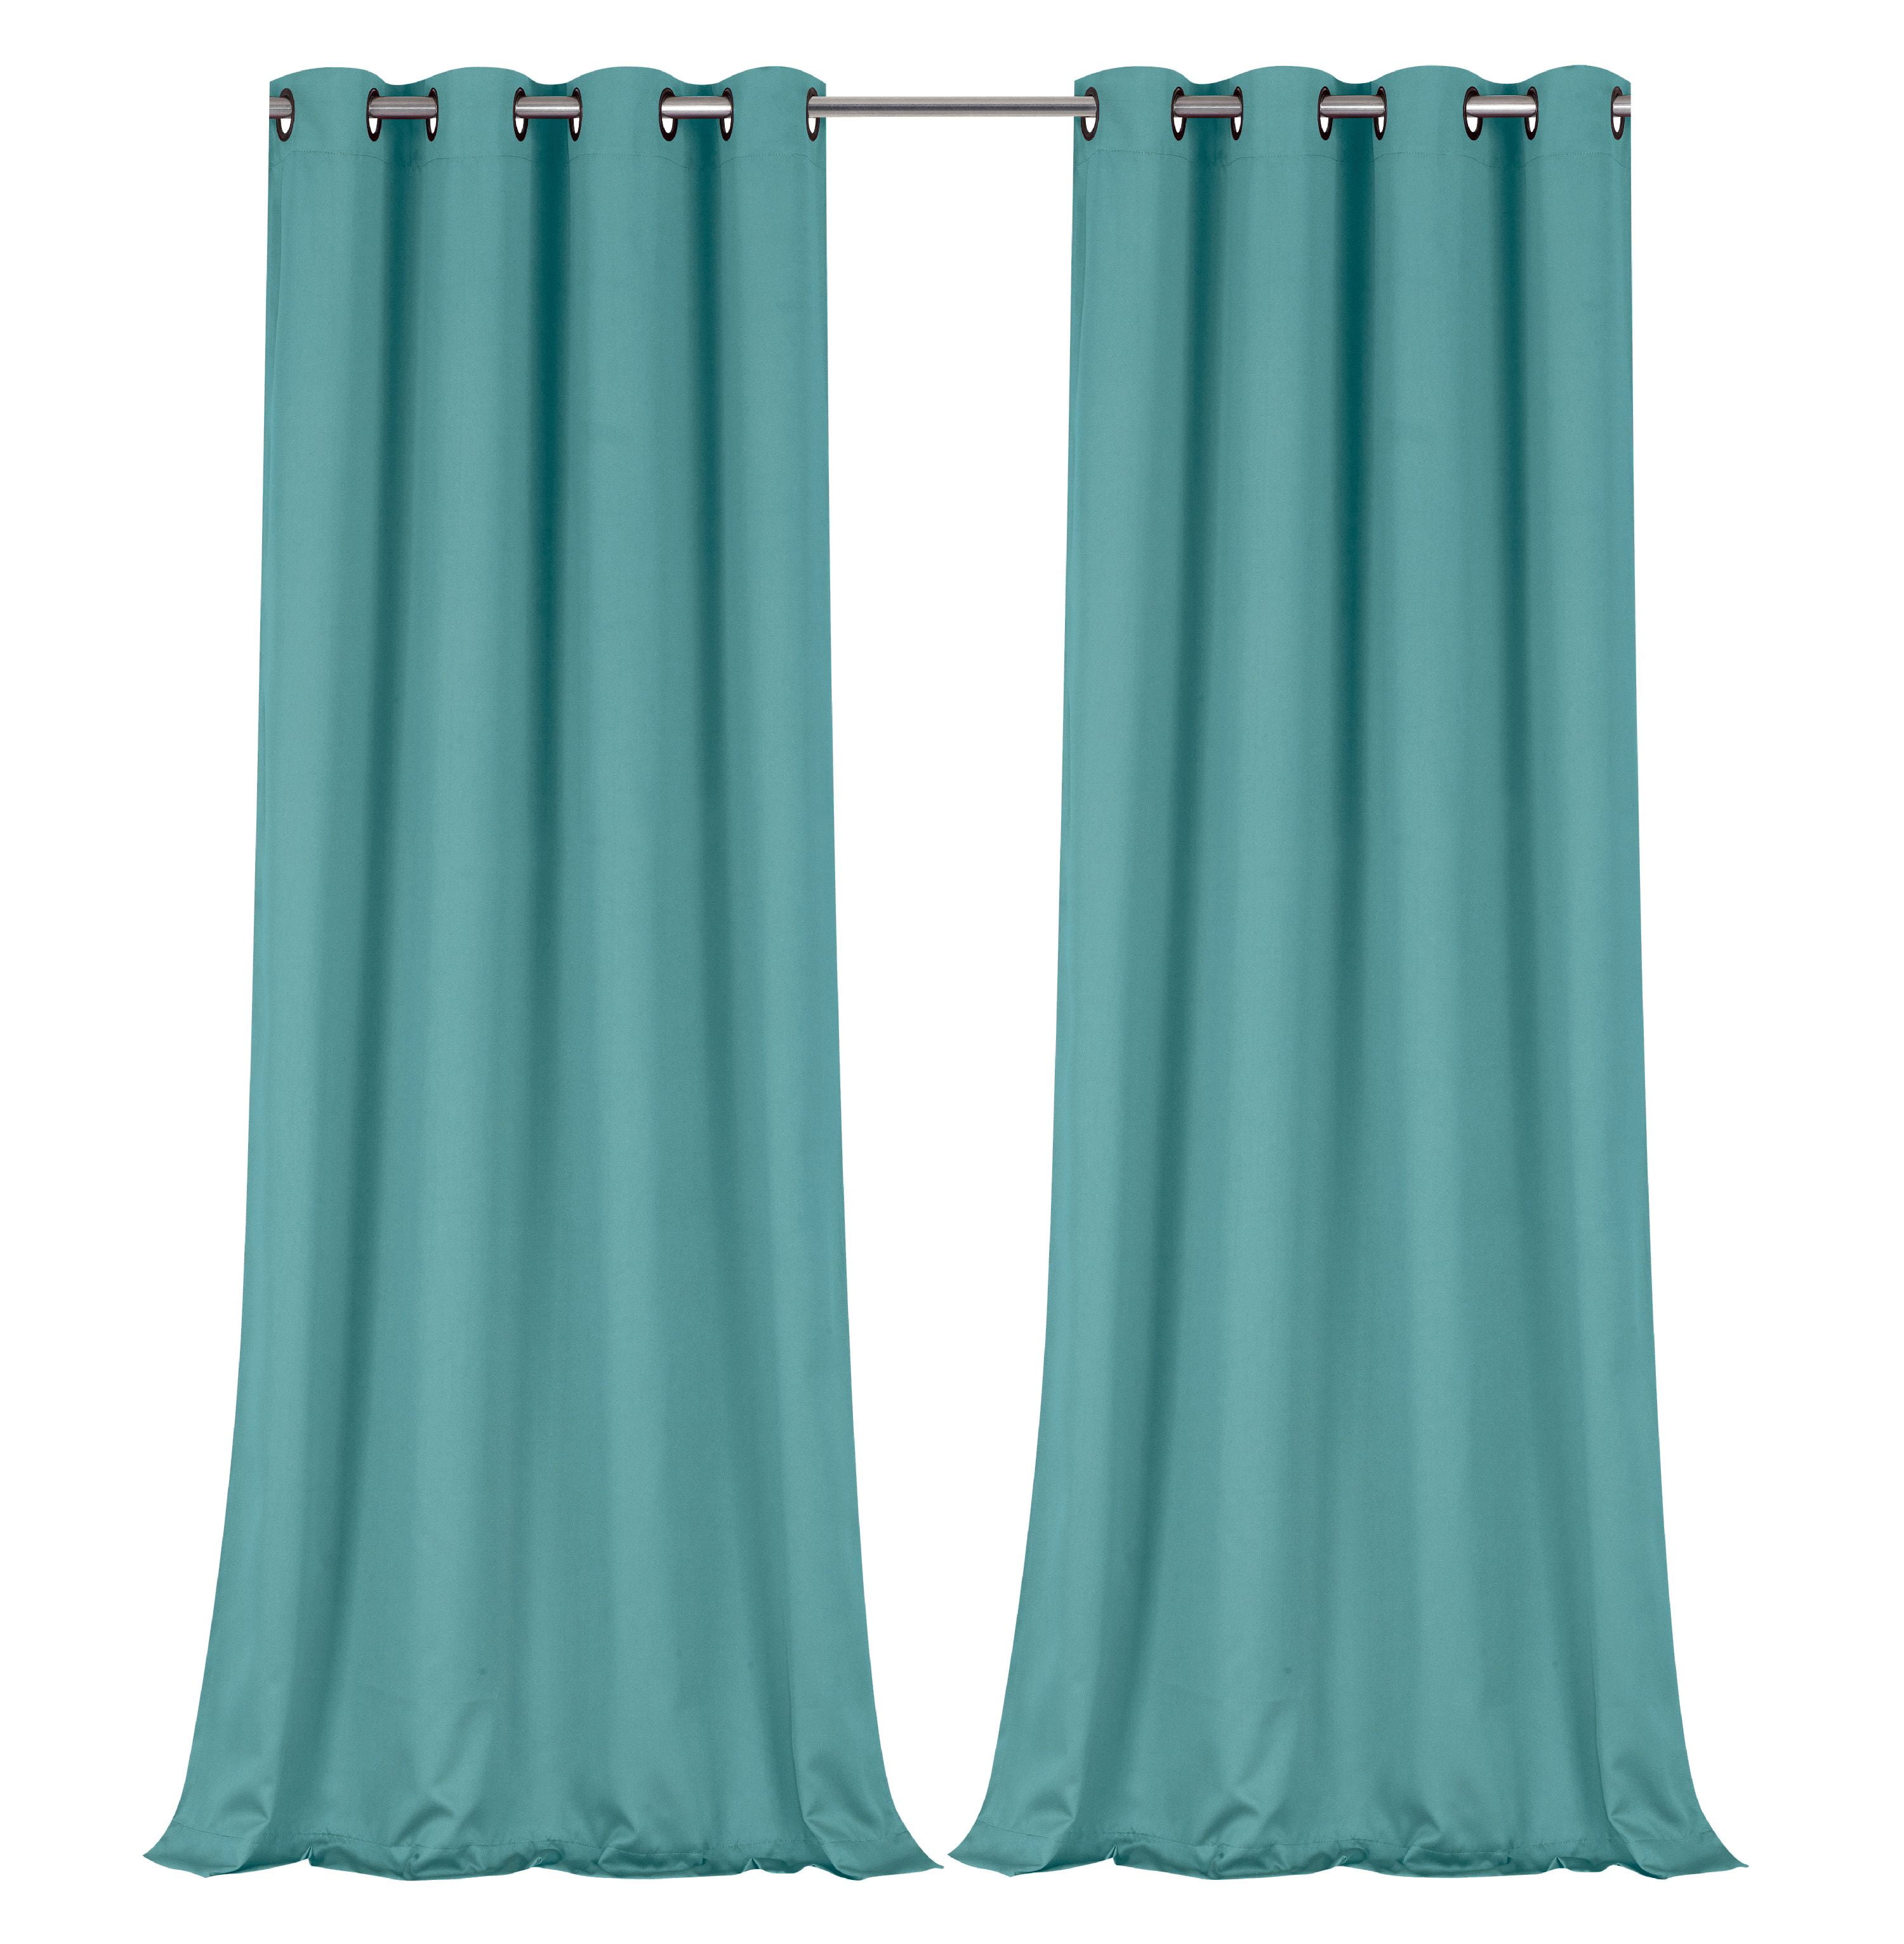 Pair Hotel Grade Decorative Drapes Blackout Lined Heavy Duty Brown Teal Tan Blue 